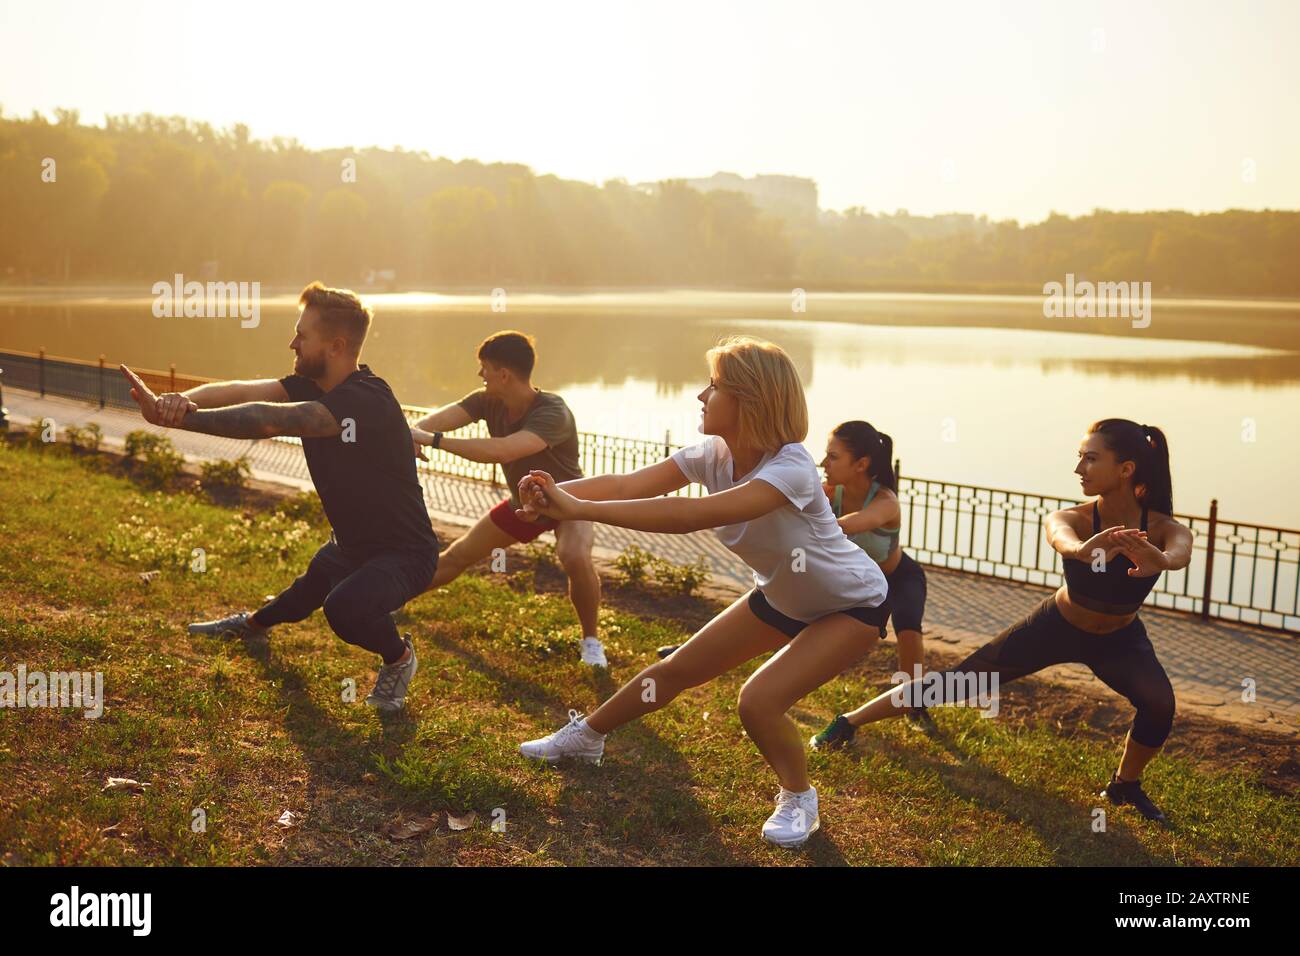 Group of young people at a training session in a park Stock Photo